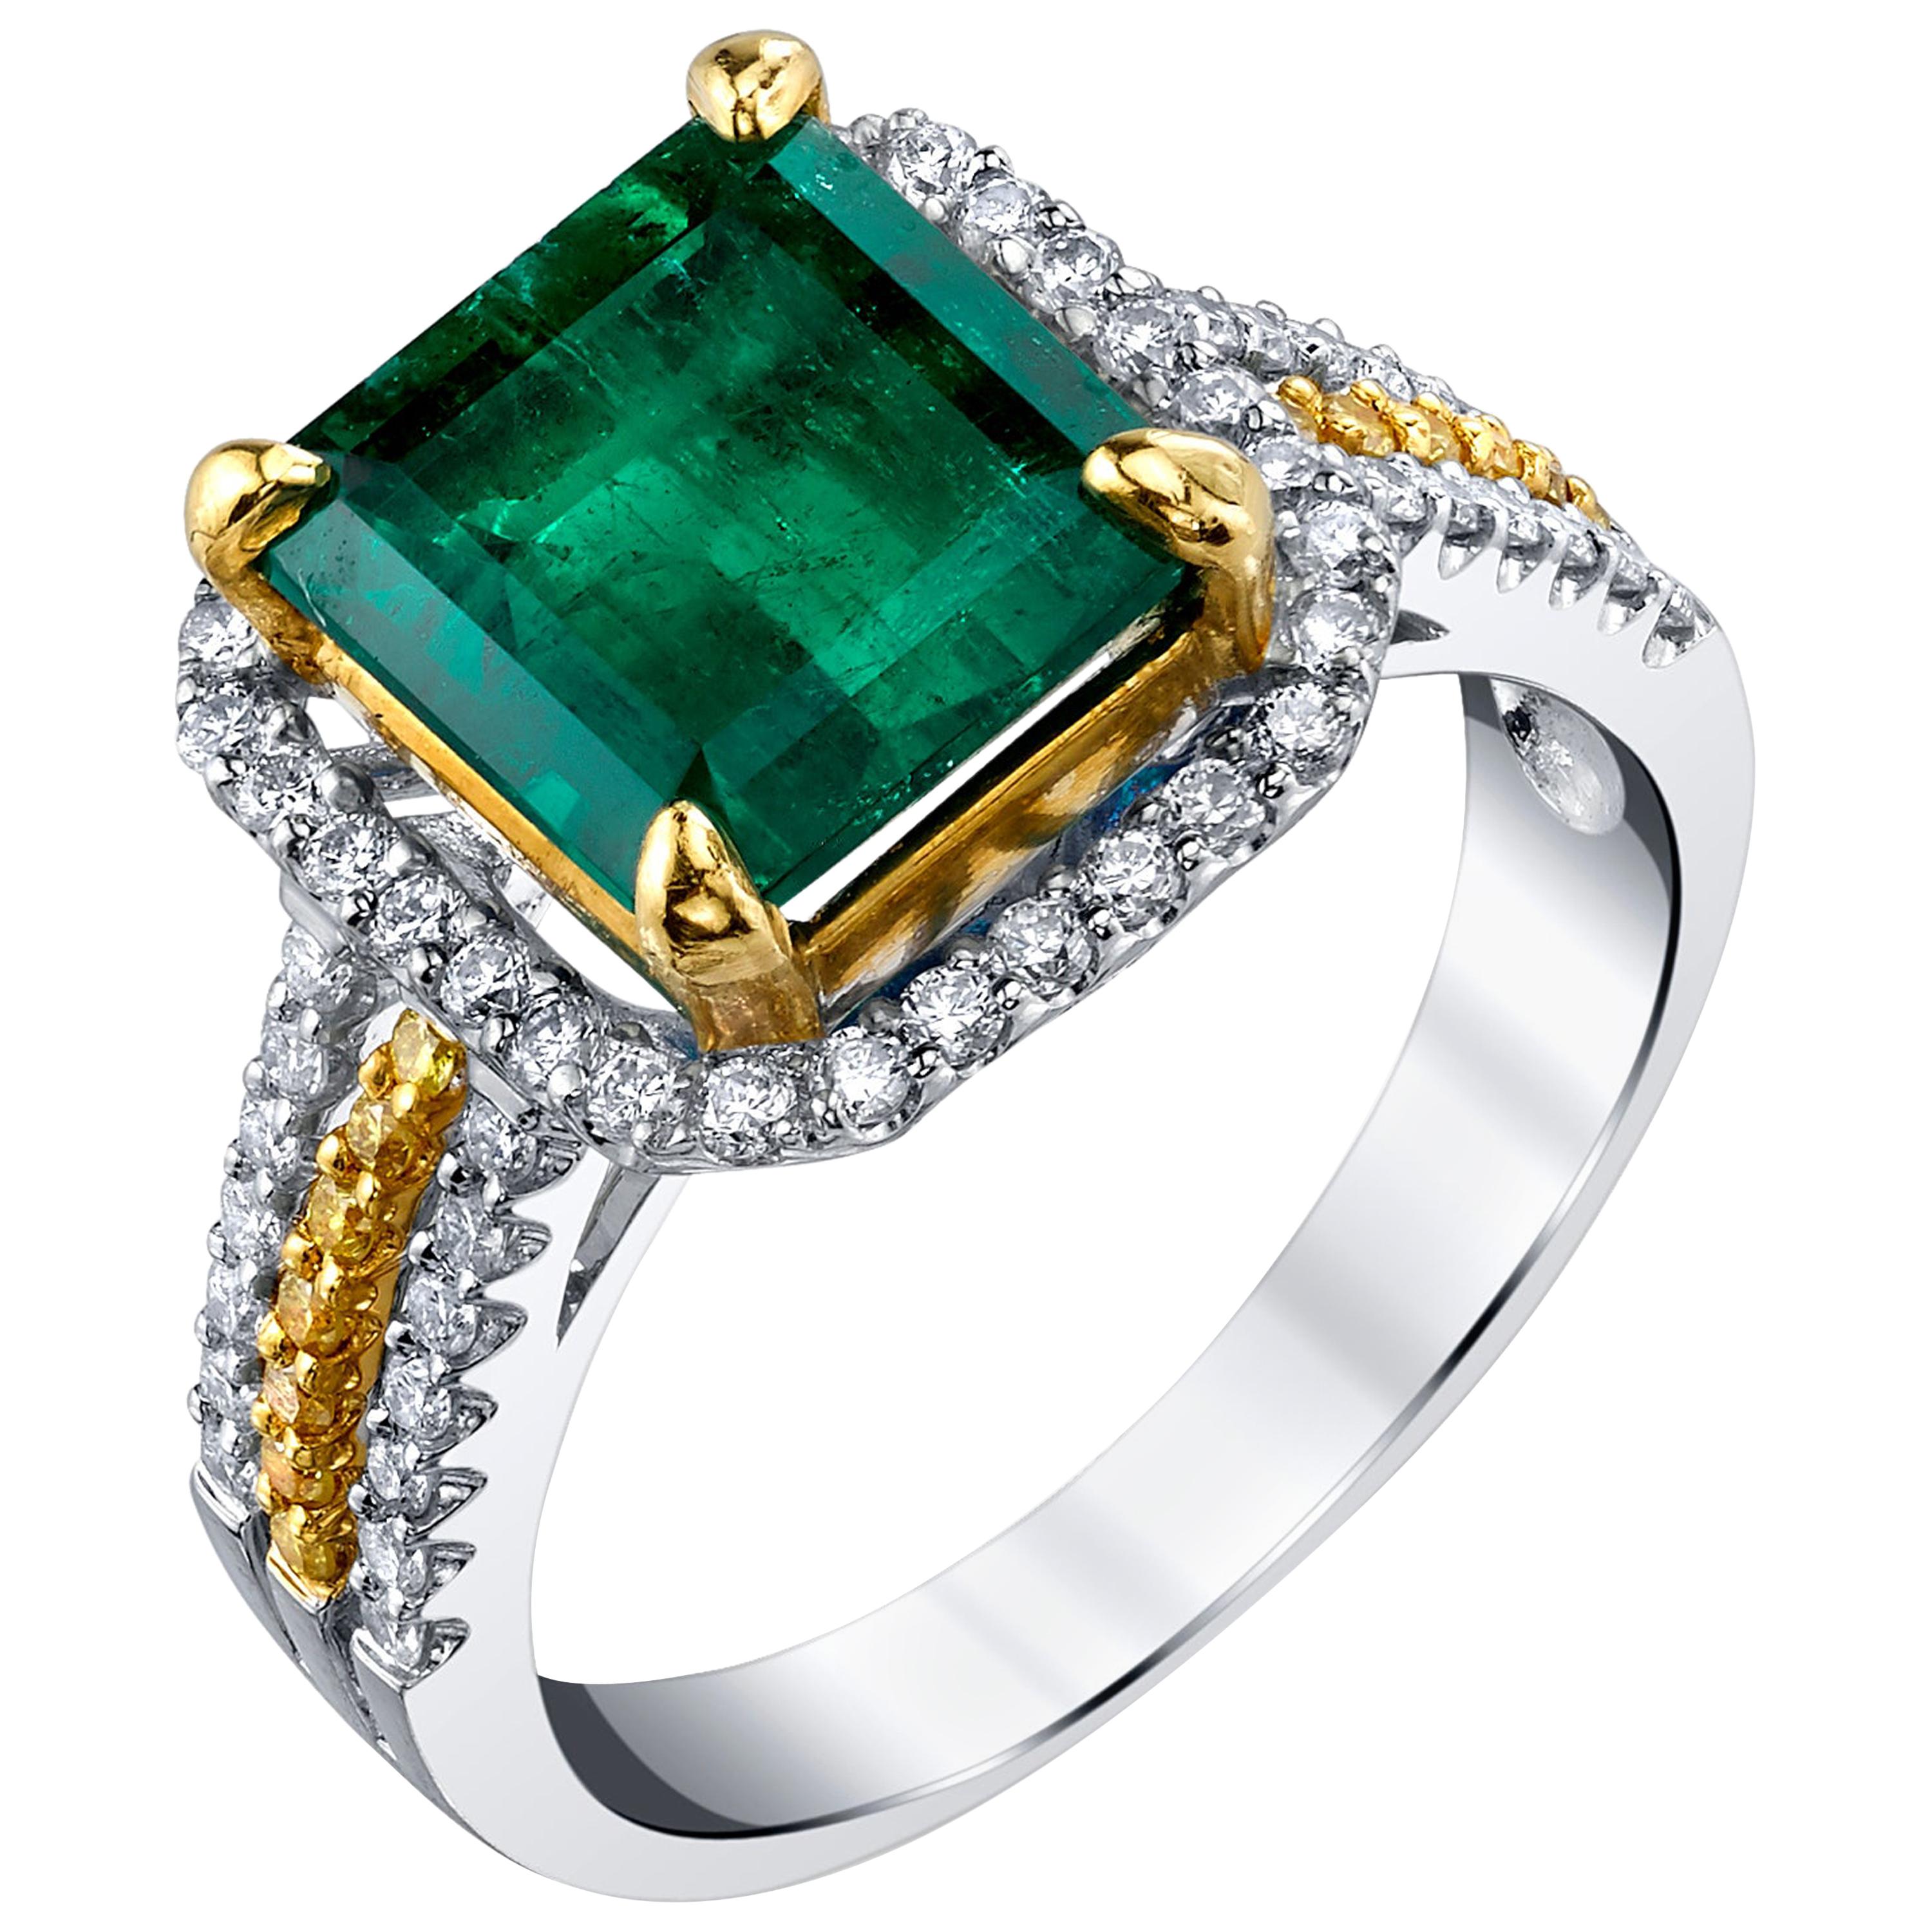 2.85 Carat Emerald Cocktail Ring with Canary and White Diamonds in 18k Gold For Sale